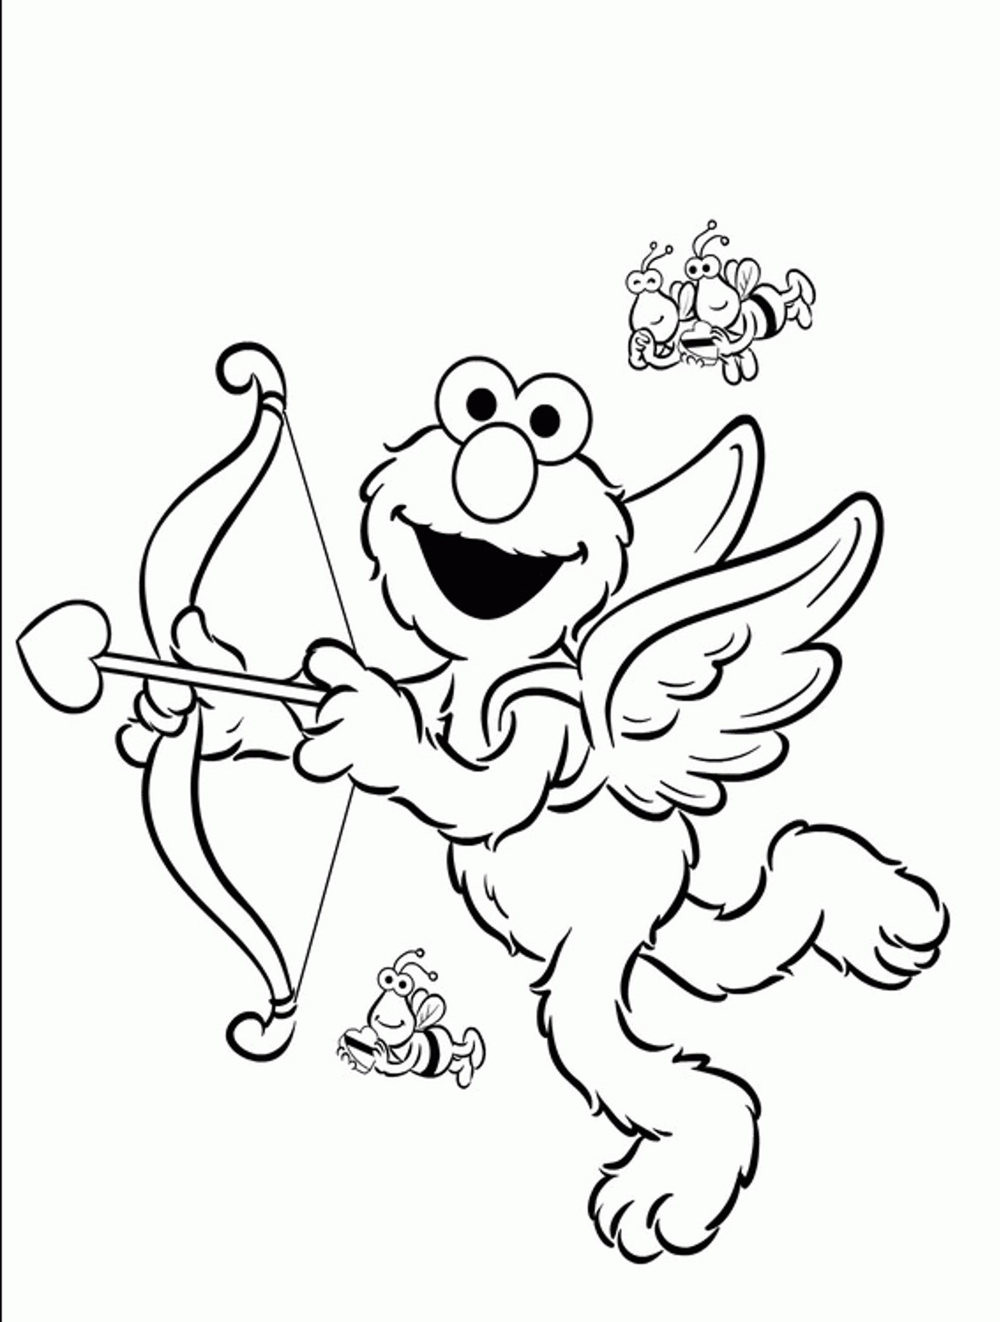 Elmo Coloring Pages For Toddlers
 Print & Download Elmo Coloring Pages for Children’s Home